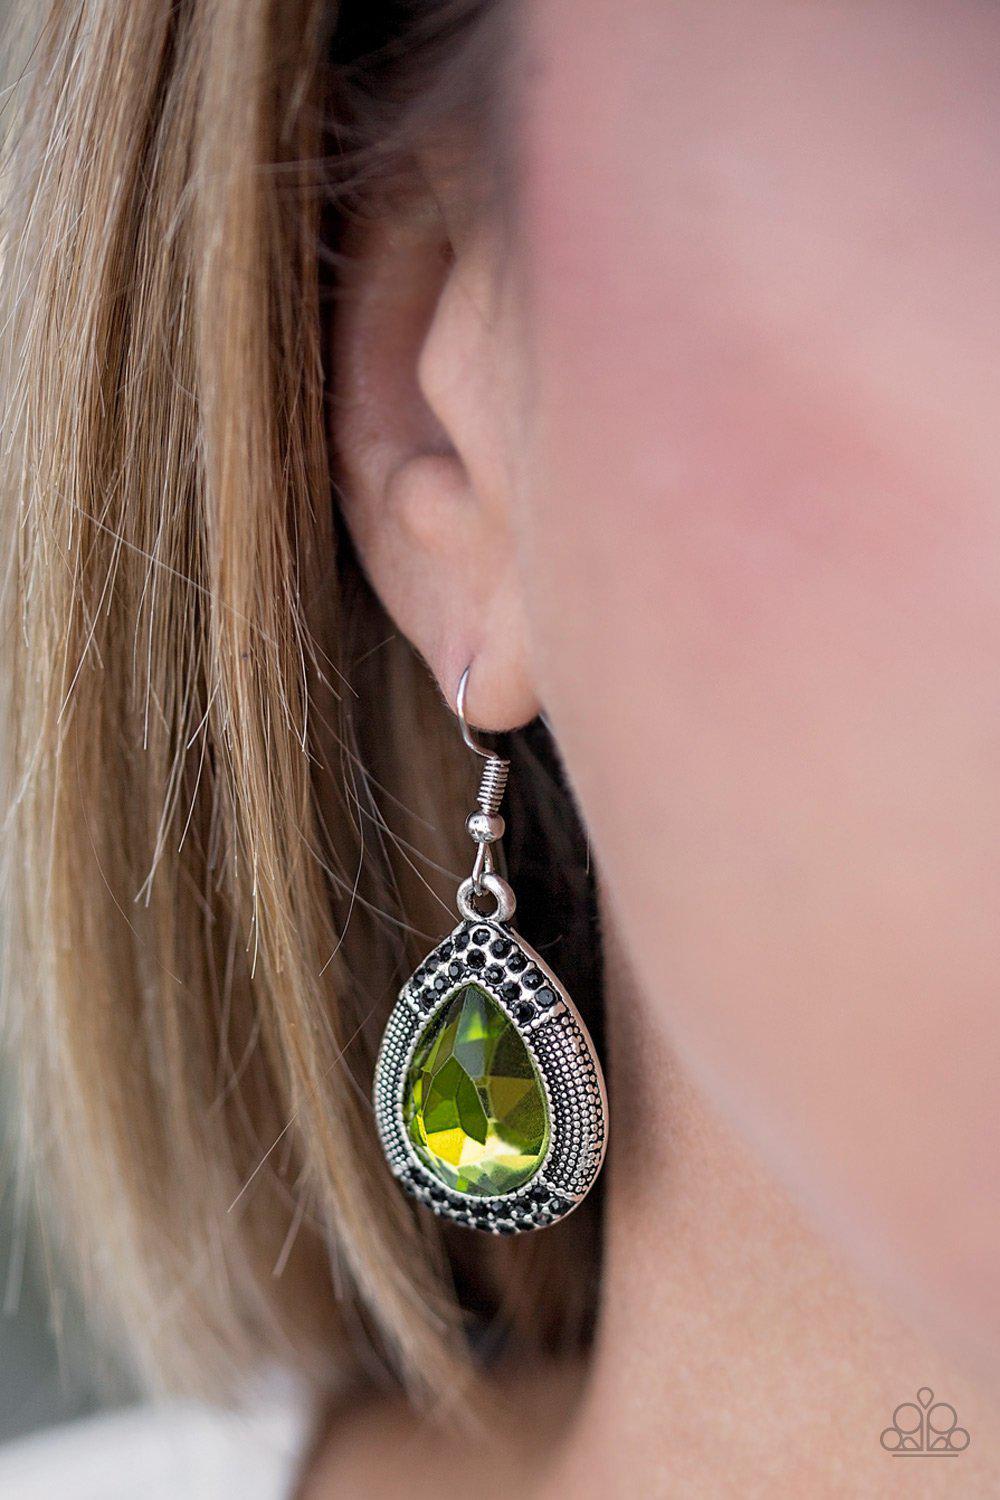 Grandmaster Shimmer Green Gem Earrings - Paparazzi Accessories-CarasShop.com - $5 Jewelry by Cara Jewels